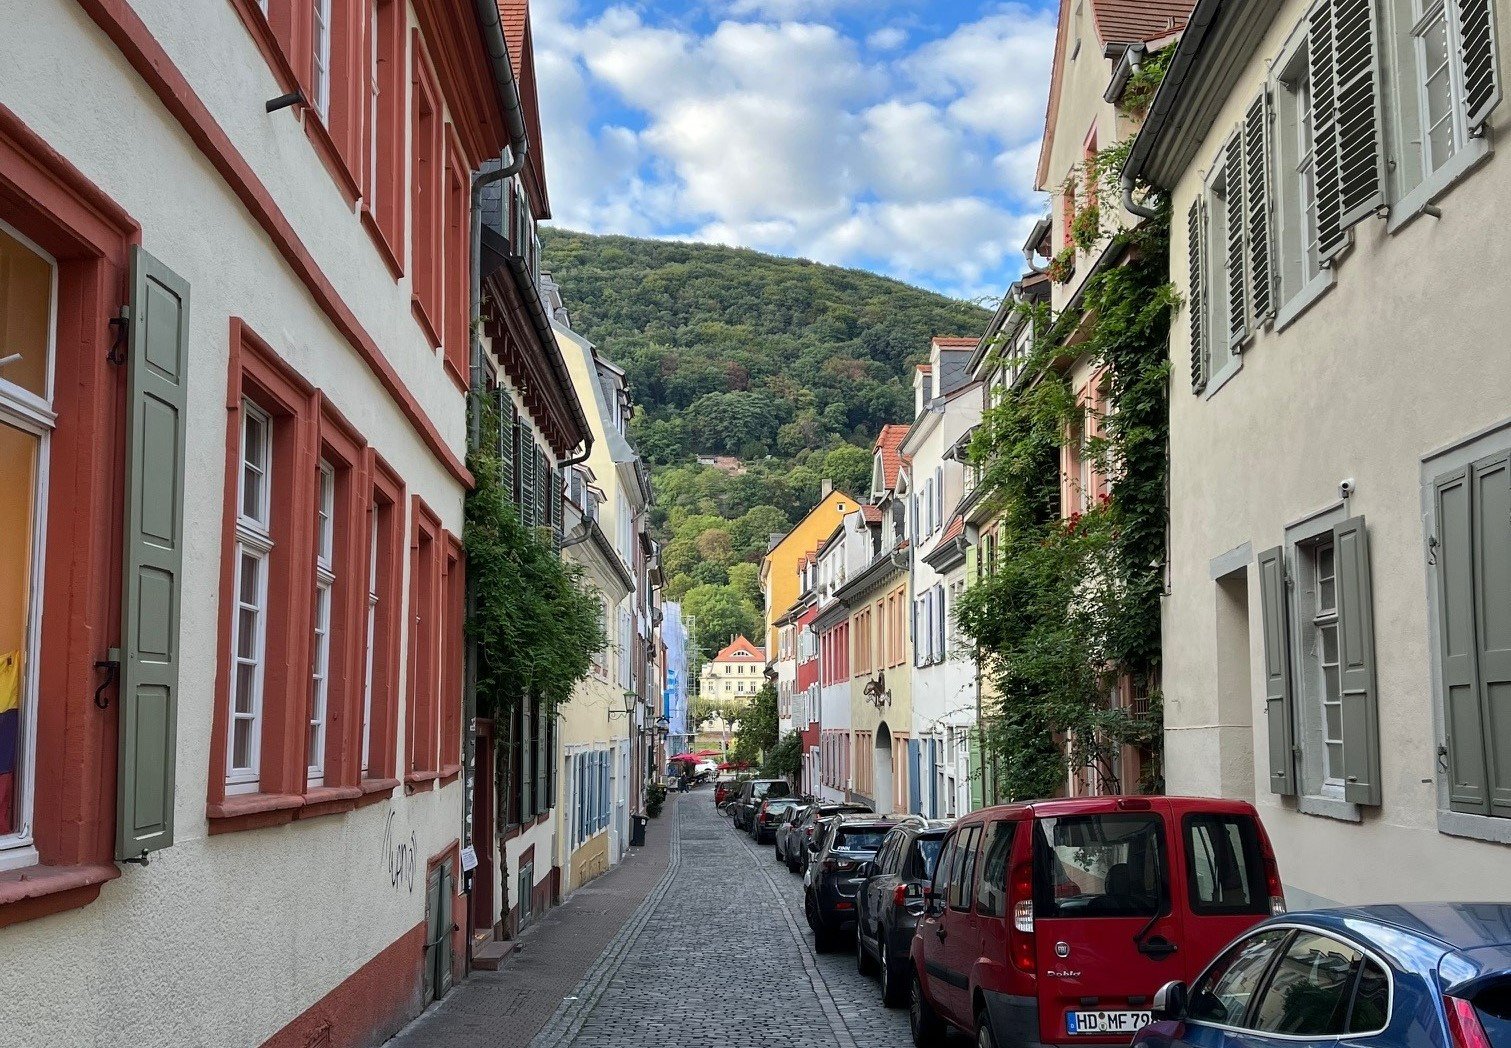 A narrow street in Heidelberg, with cars parked on the right-hand side and a white building with red shutters on the left.